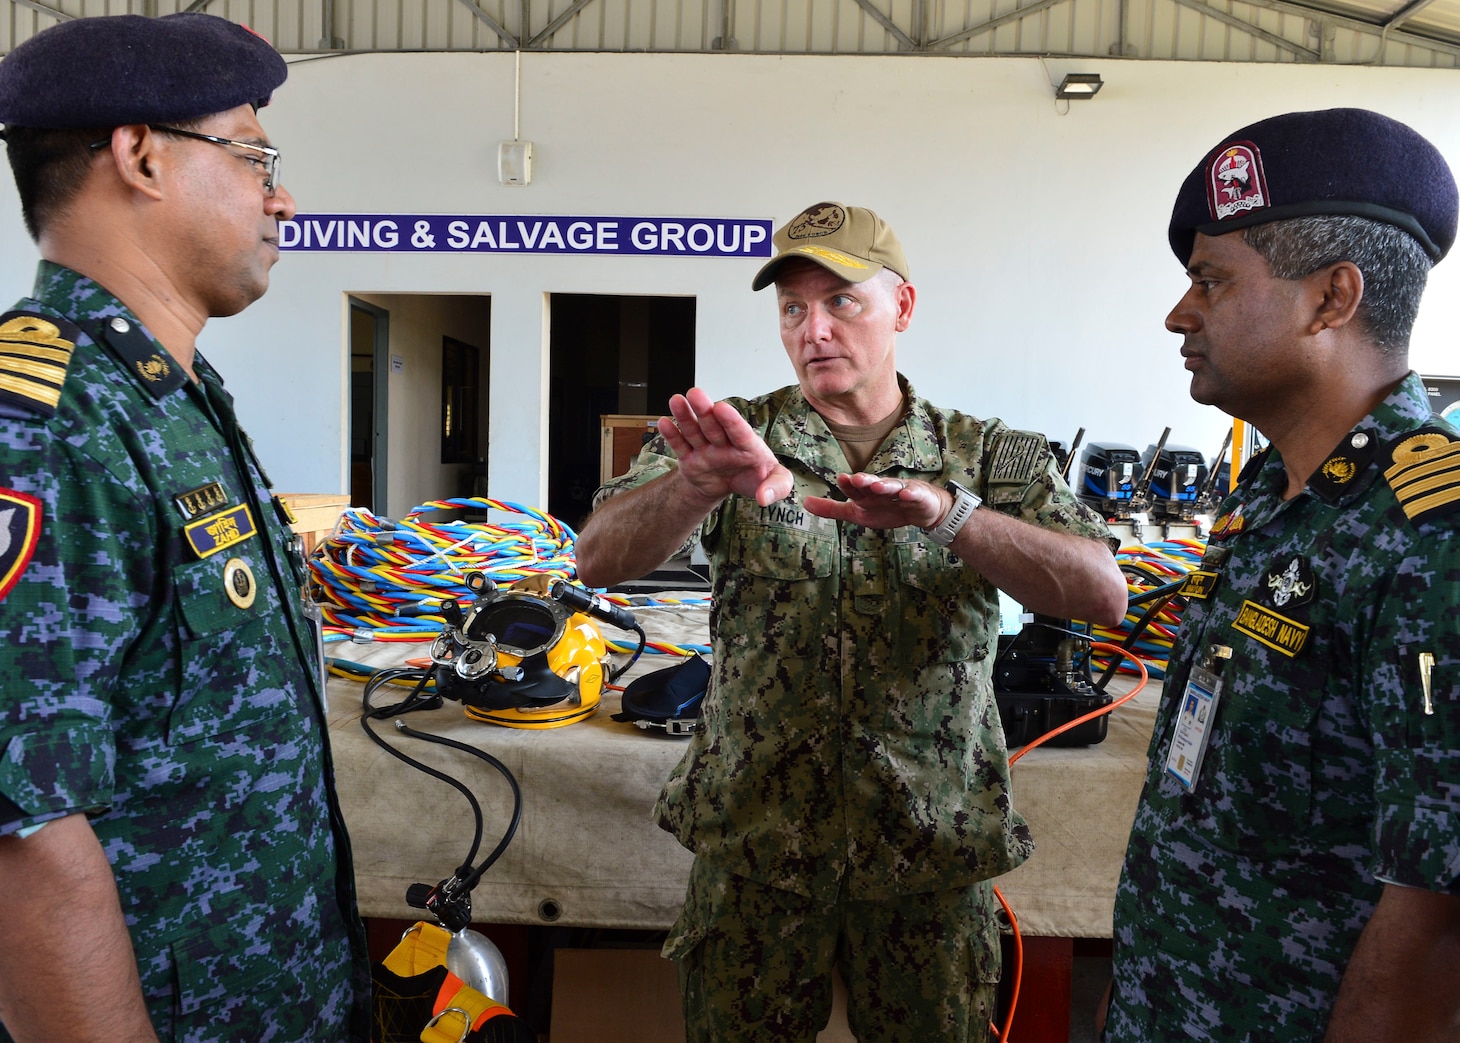 Chattogram, Bangladesh (Nov. 4, 2019) Rear Adm. Joey Tynch, commander, Logistics Group Western Pacific, speaks with senior delegates of the Special Warfare Diving and Salvage (SWADS) community as part of Cooperation Afloat Readiness and Training (CARAT) Bangladesh 2019. This year marks the 25th iteration of CARAT, a multinational exercise designed to enhance U.S. and partner navies' abilities to operate together in response to traditional and non-traditional maritime security challenges in the Indo-Pacific region.